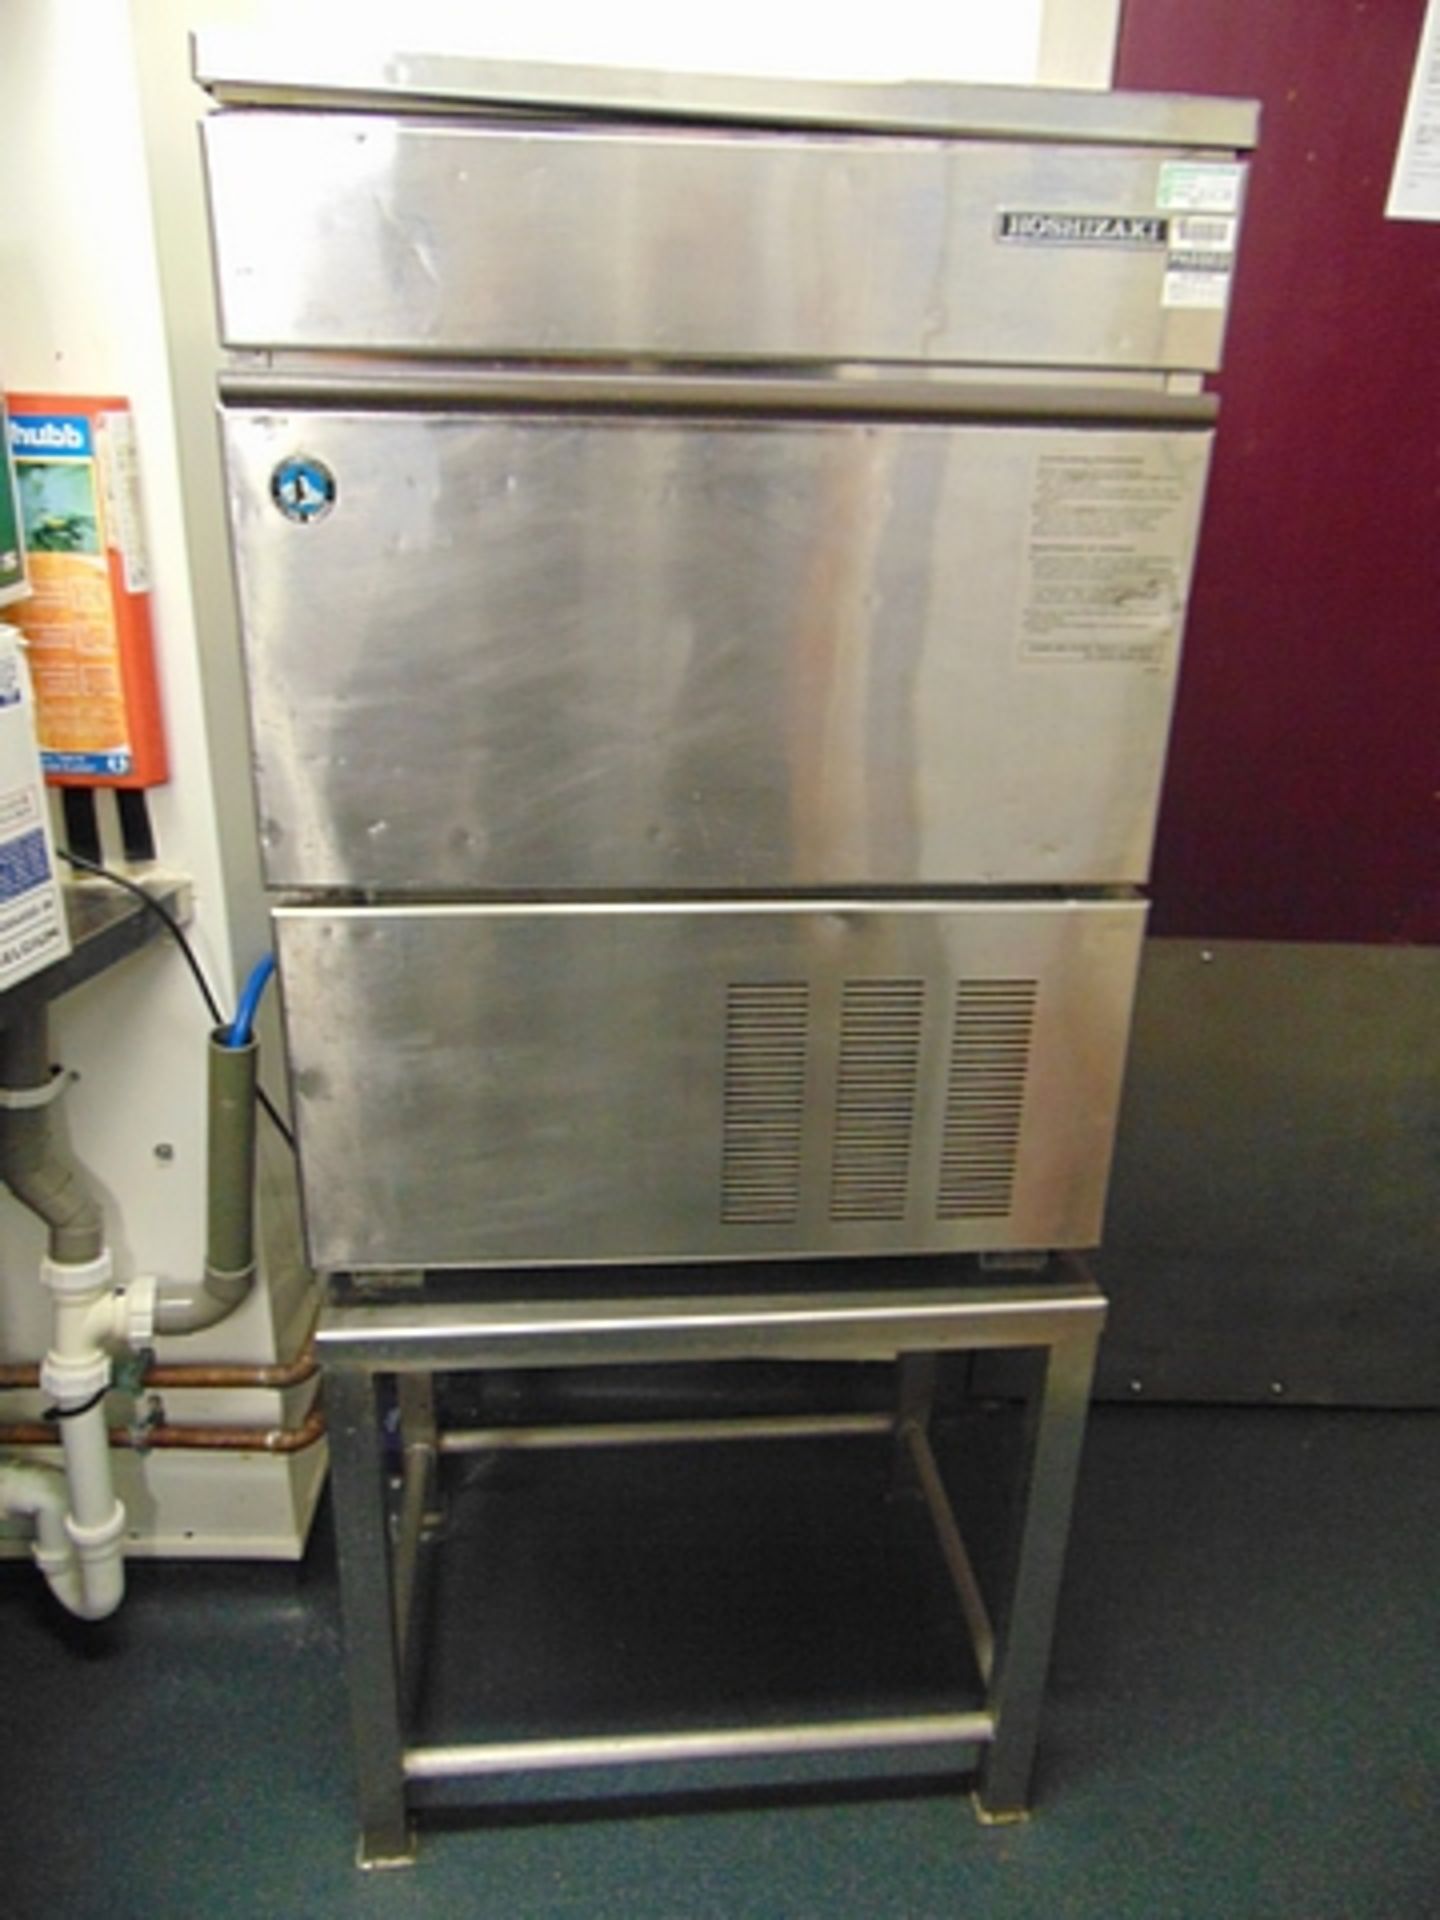 Hoshizaki IM65LE ice maker 56kg ice production in 24hrs 240v single phase 633mm x 506mm x 850mm (s/n